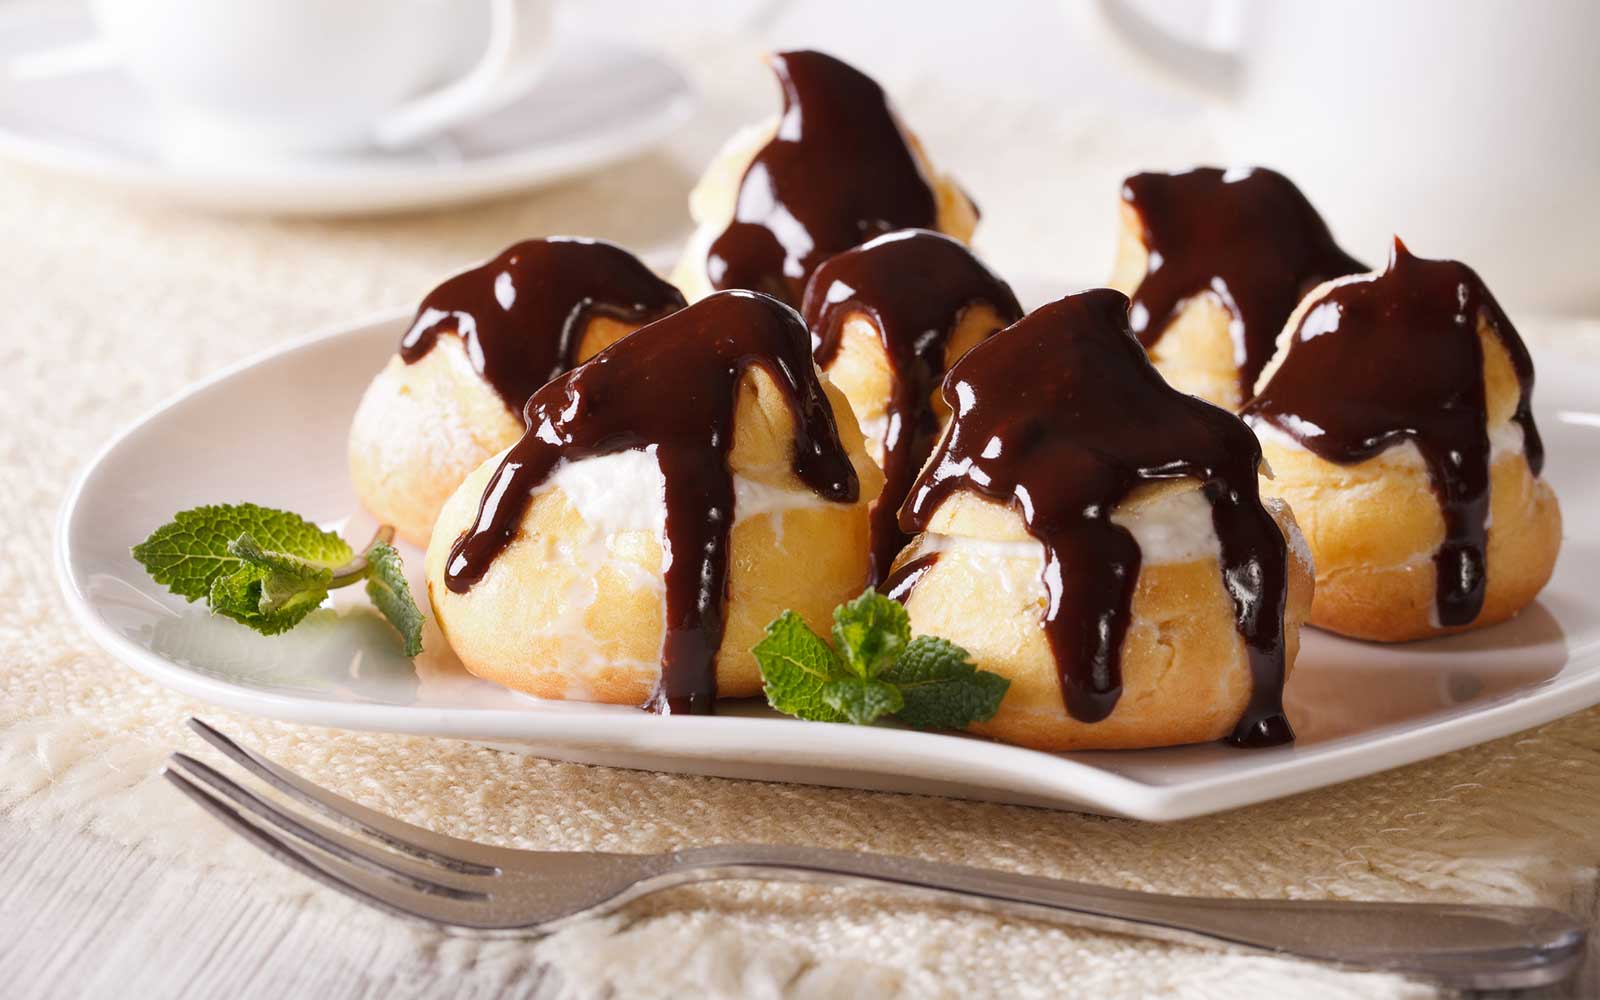 How to make the profiteroles at home: the recipe